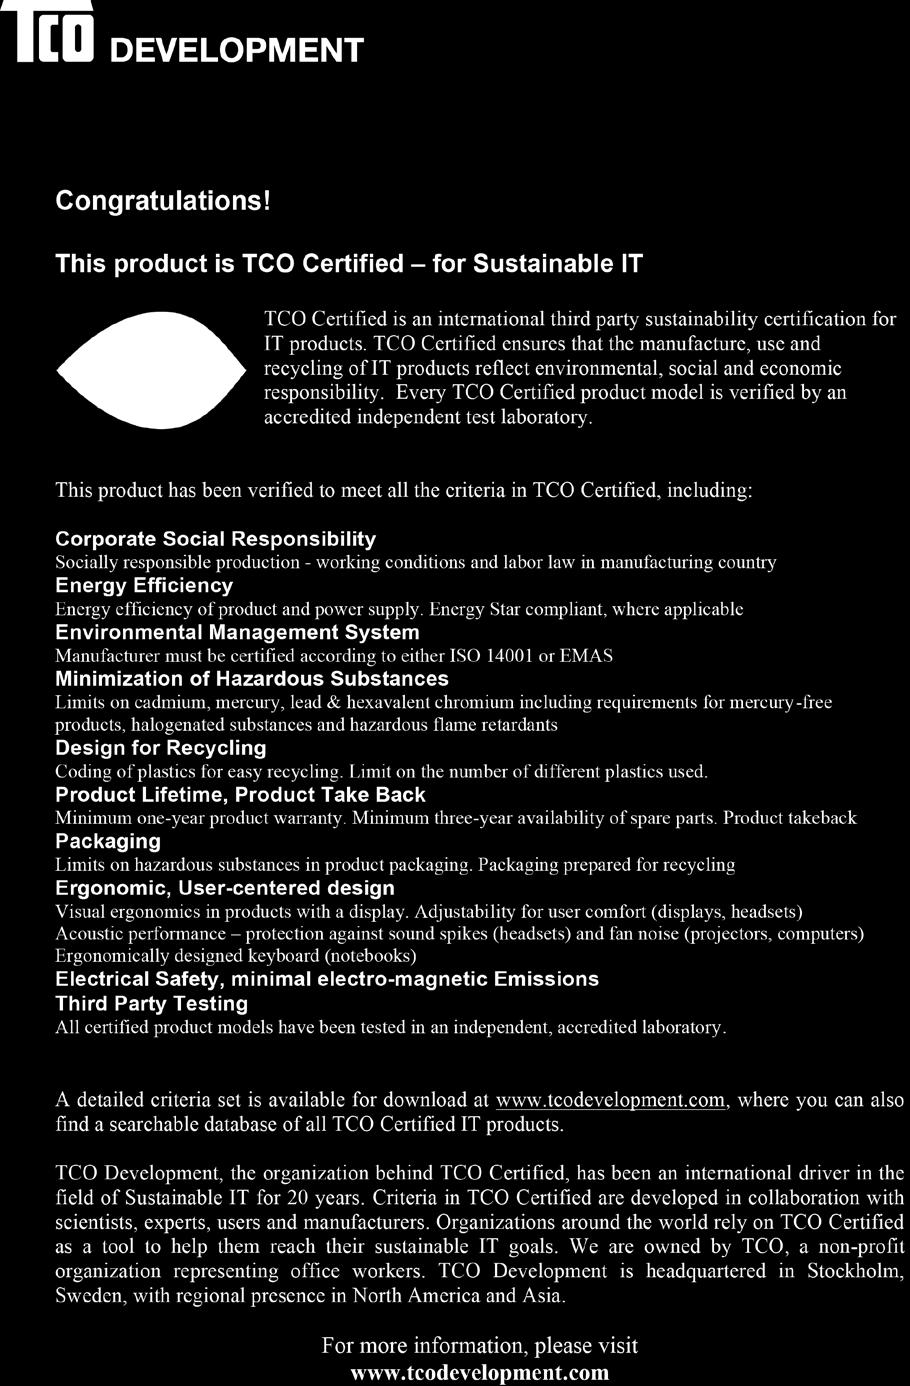 TCO DOCUMENT (FOR